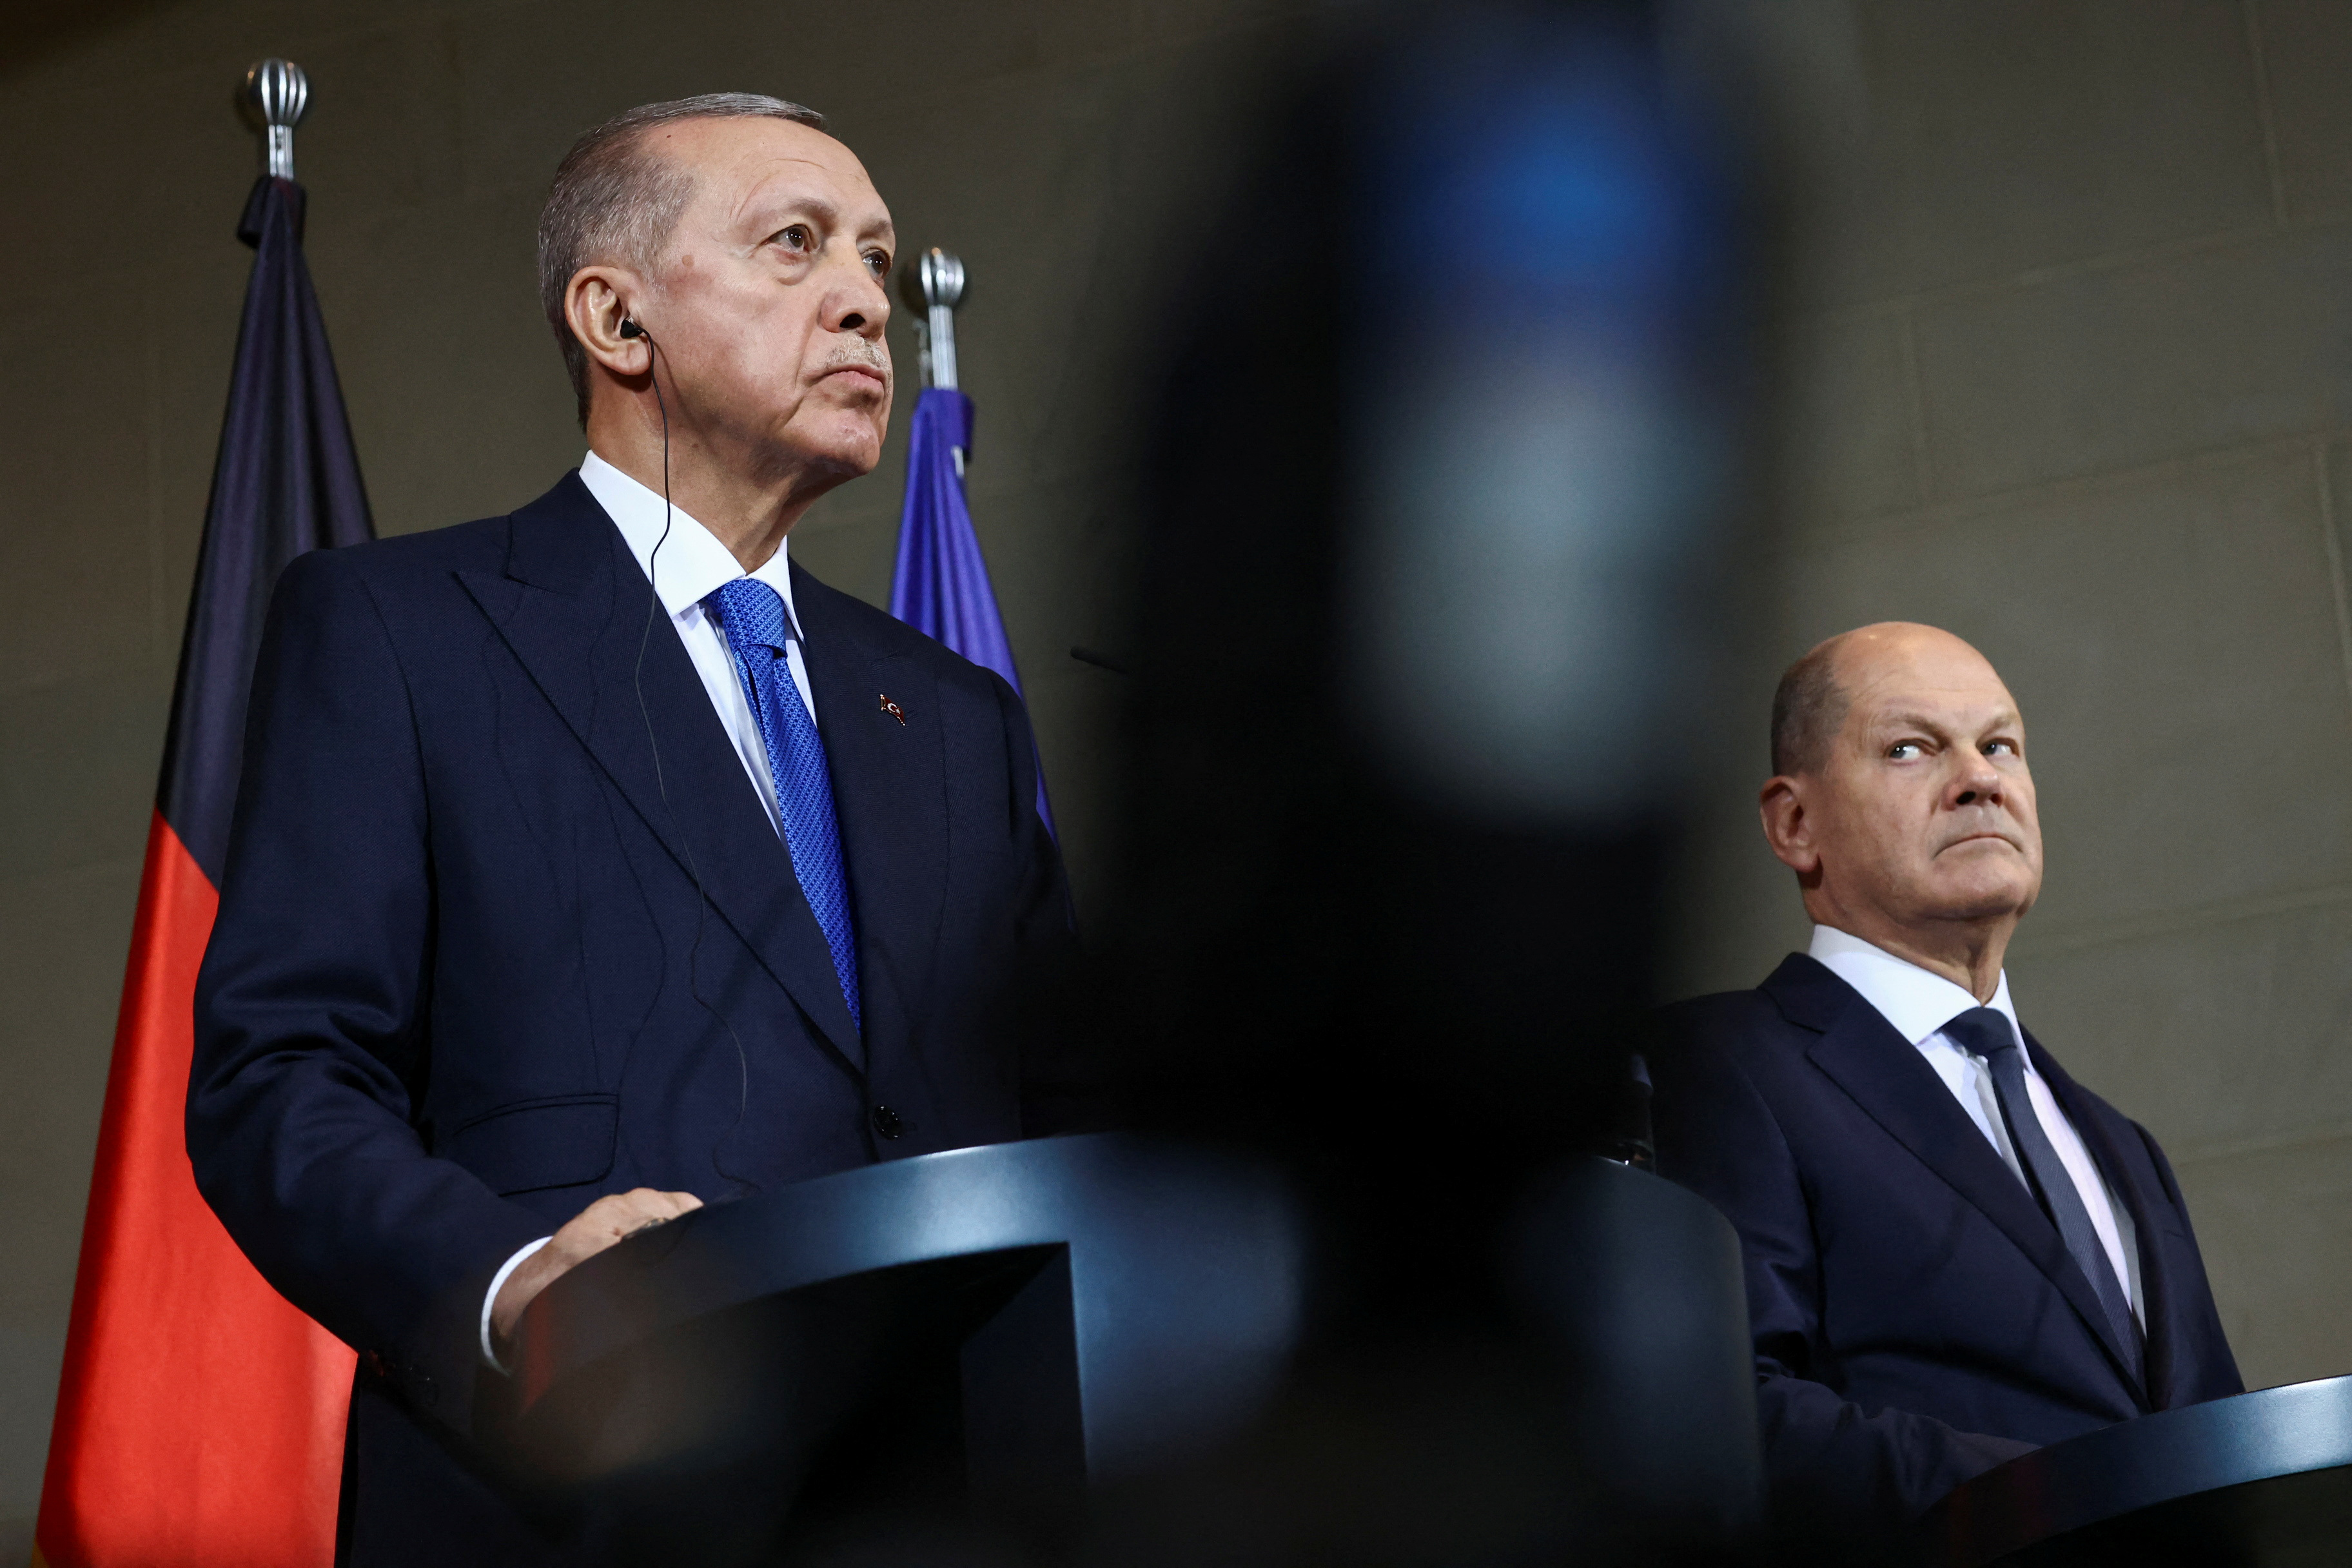 German Chancellor Olaf Scholz and Turkish President Recep Tayyip Erdogan attend a press conference at the Chancellery in Berlin, Germany last Friday. Reuters